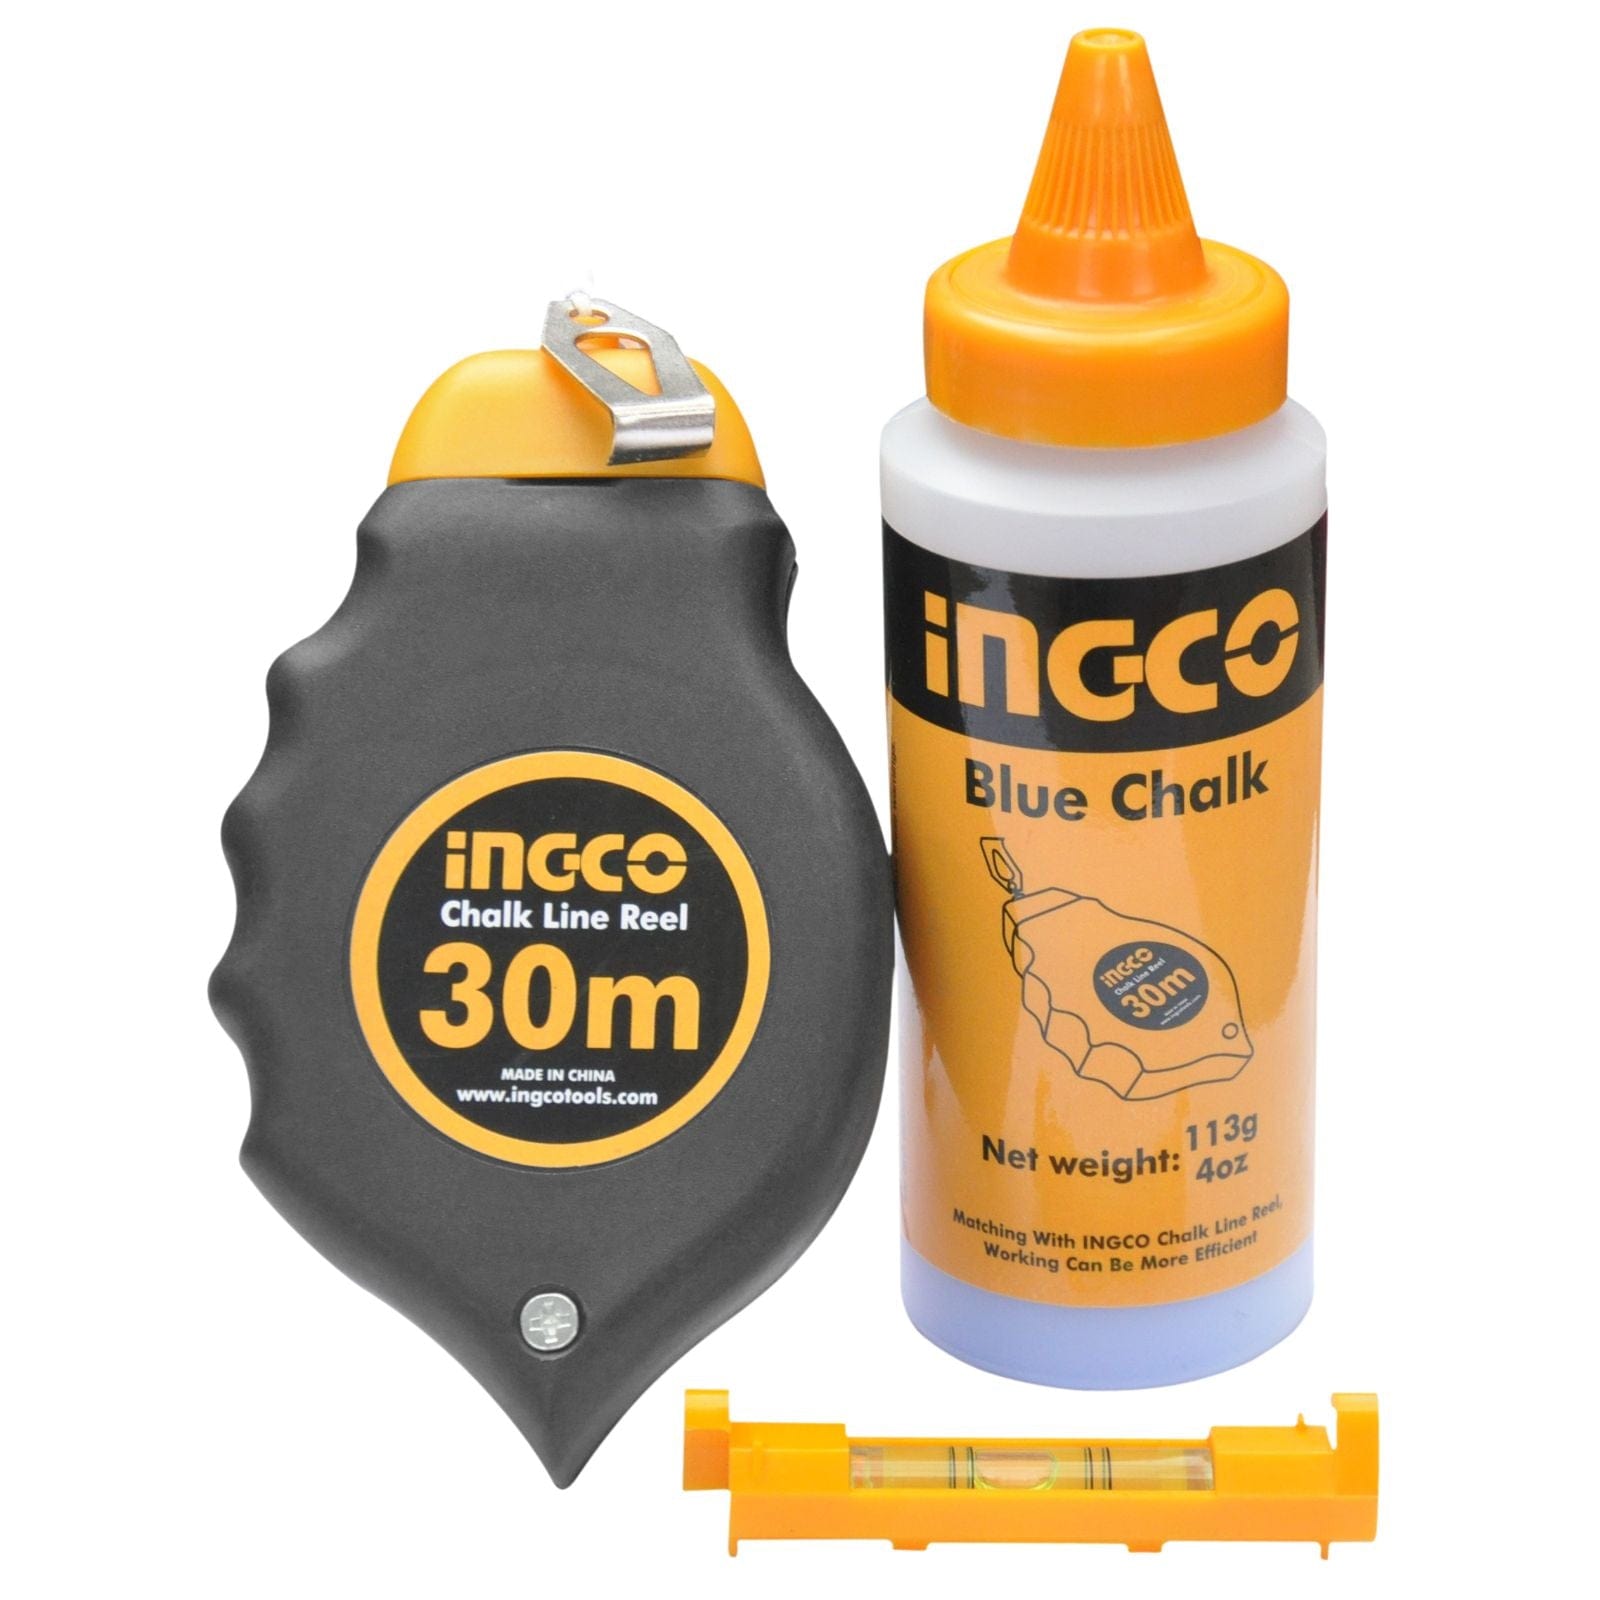 Ingco Chalk Line Reel - HCLR0130 - Buy Online in Accra, Ghana at Supply Master Chuck Keys & Specialty Accessories Buy Tools hardware Building materials